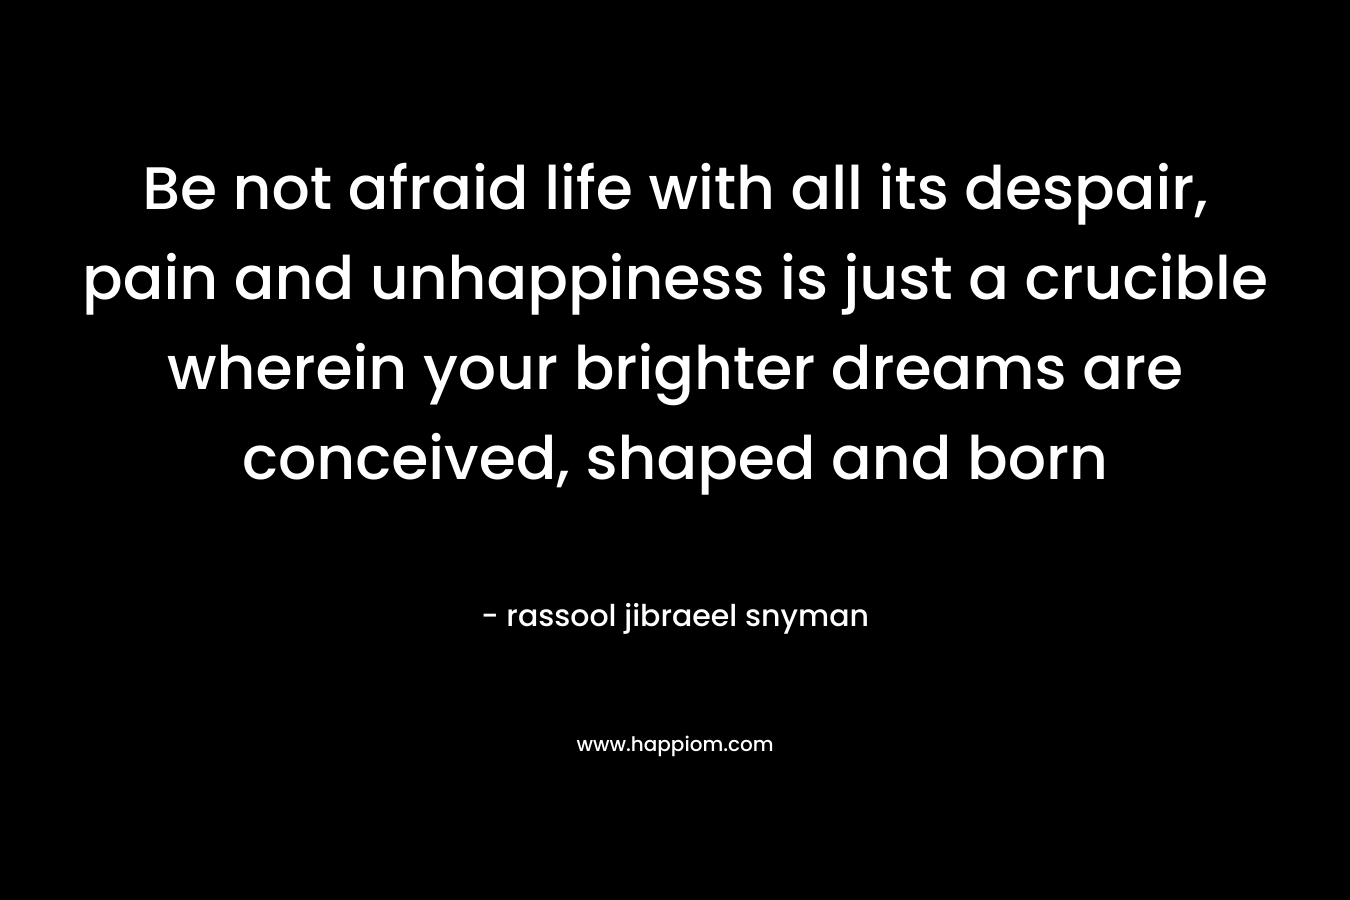 Be not afraid life with all its despair, pain and unhappiness is just a crucible wherein your brighter dreams are conceived, shaped and born – rassool jibraeel snyman